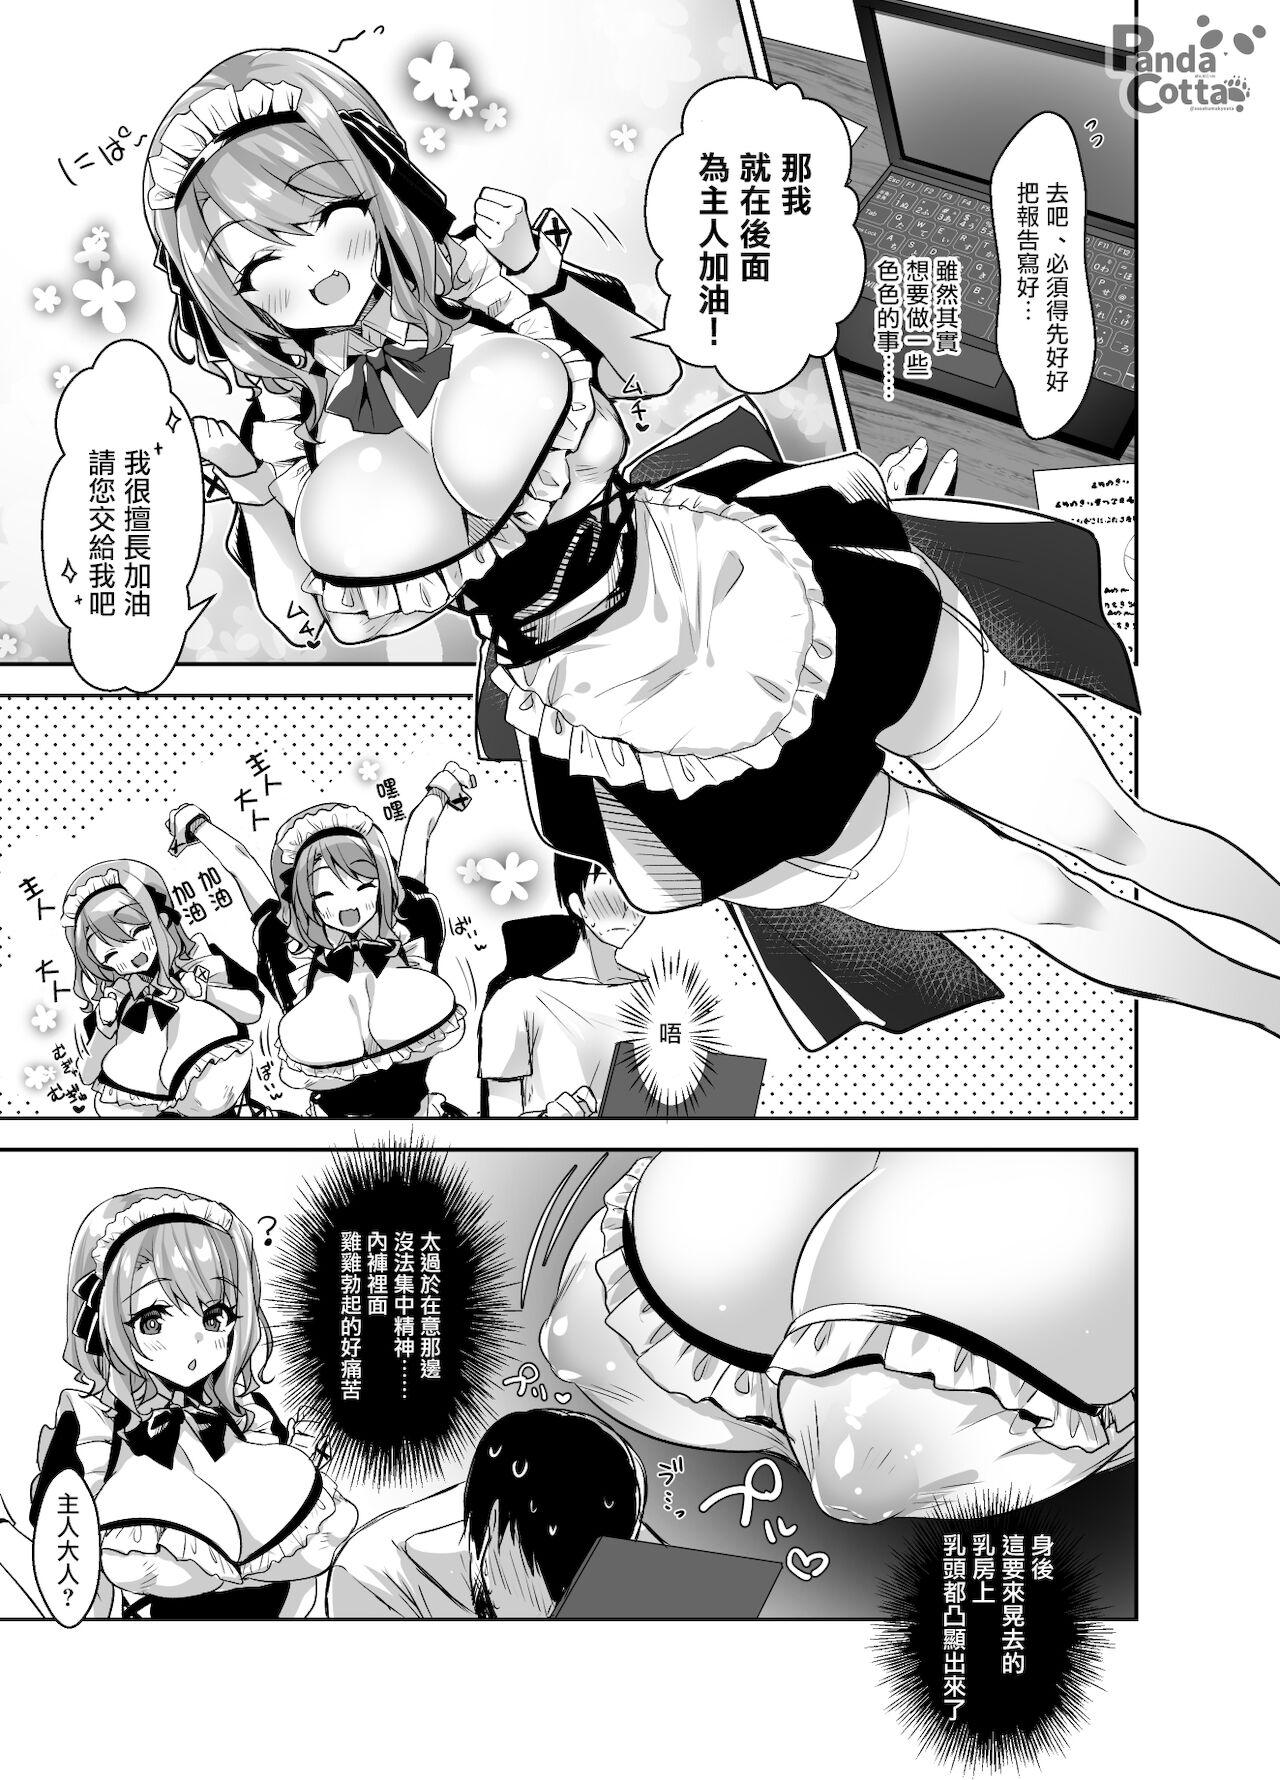 Clothed Sex Oppai Maid Delivery - Original Tits - Page 9